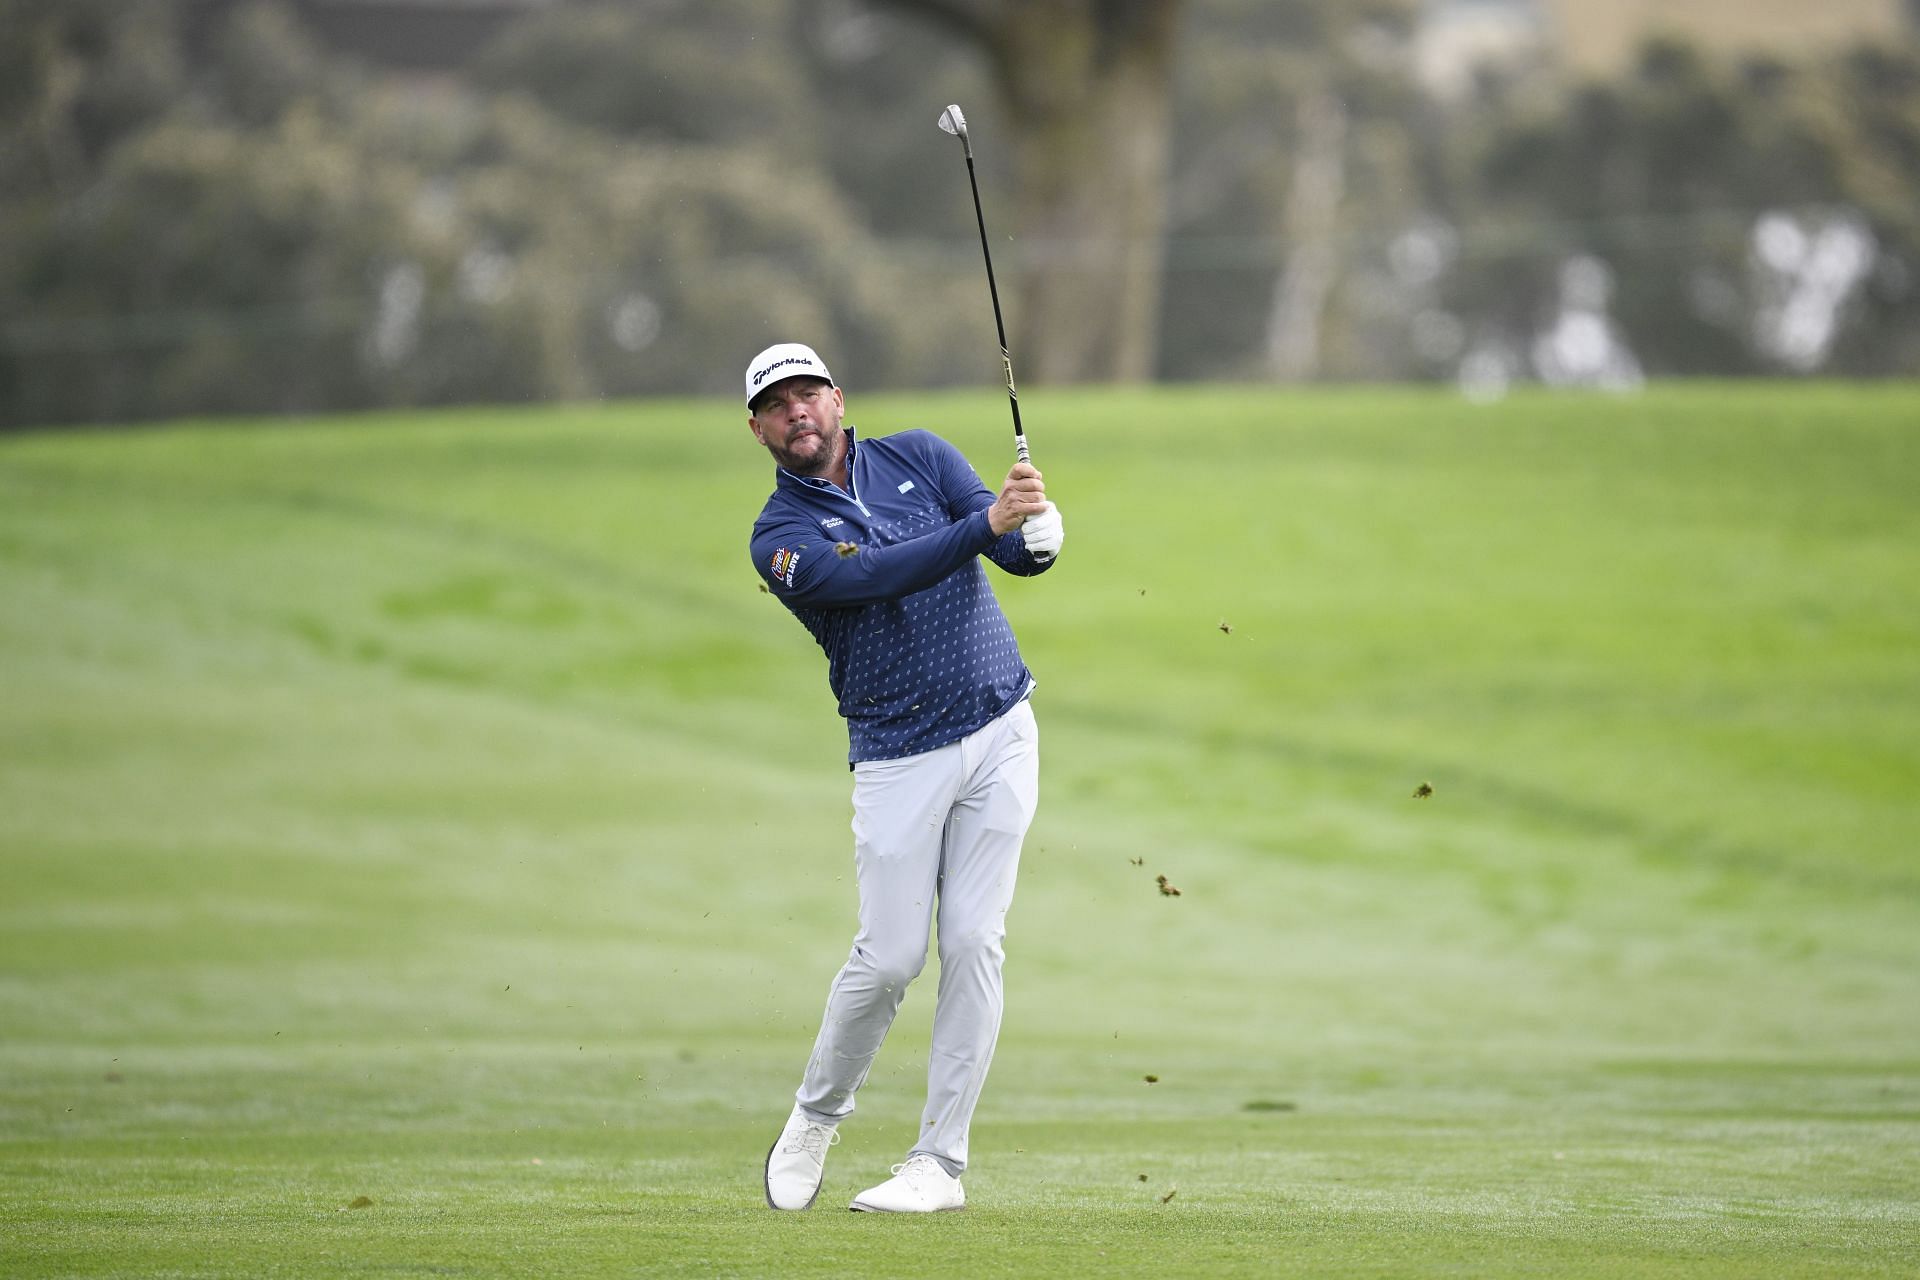 Michael Block was last seen competing at the Farmers Insurance Open in February